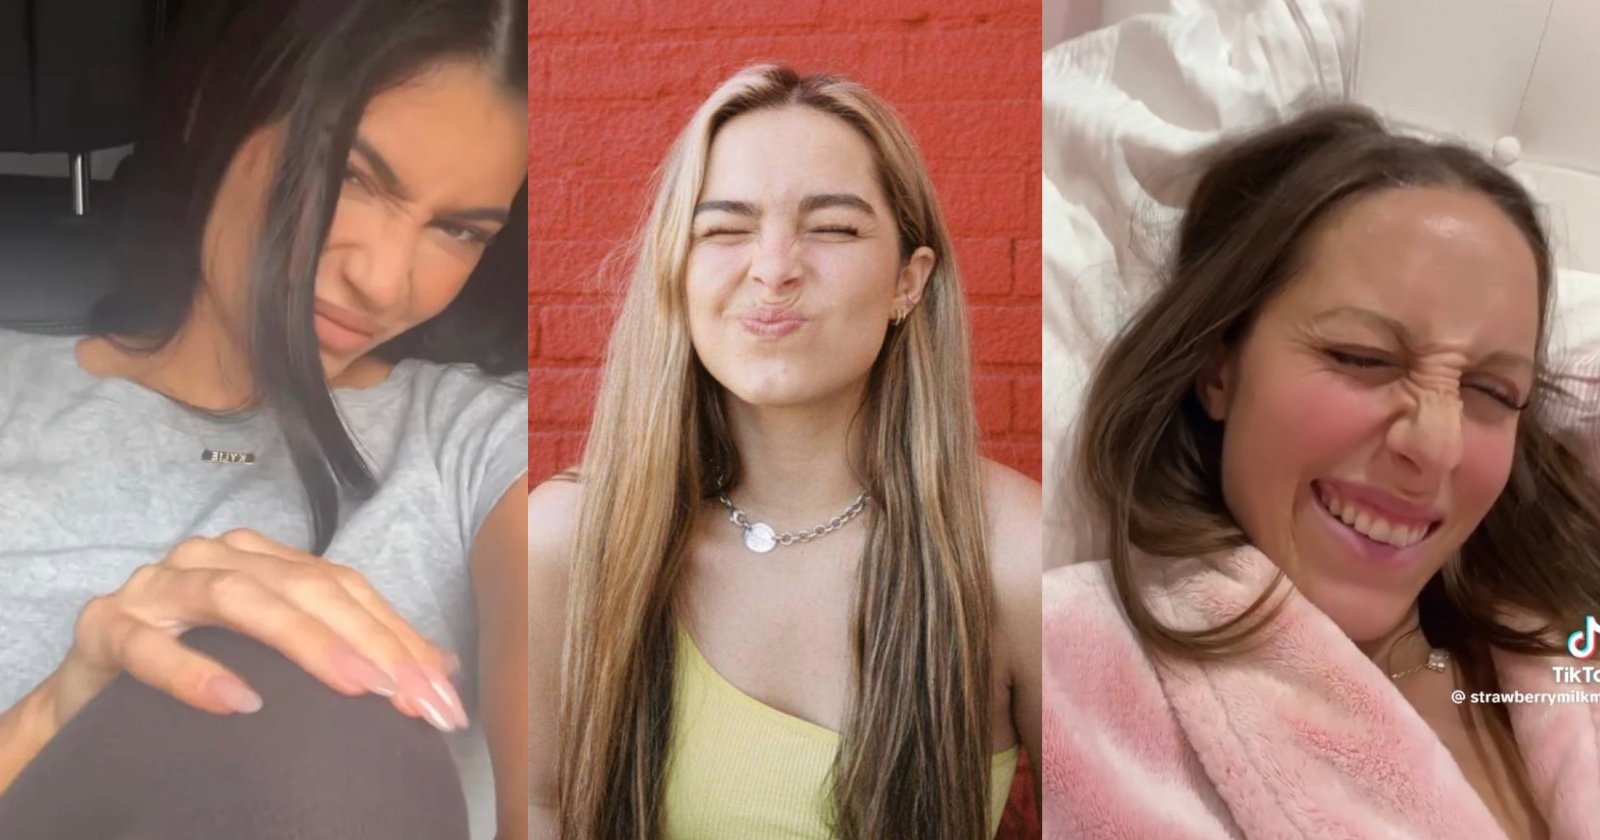 The Generation Z Scrunch Face is the Selfie Pose Taking Over Instagram